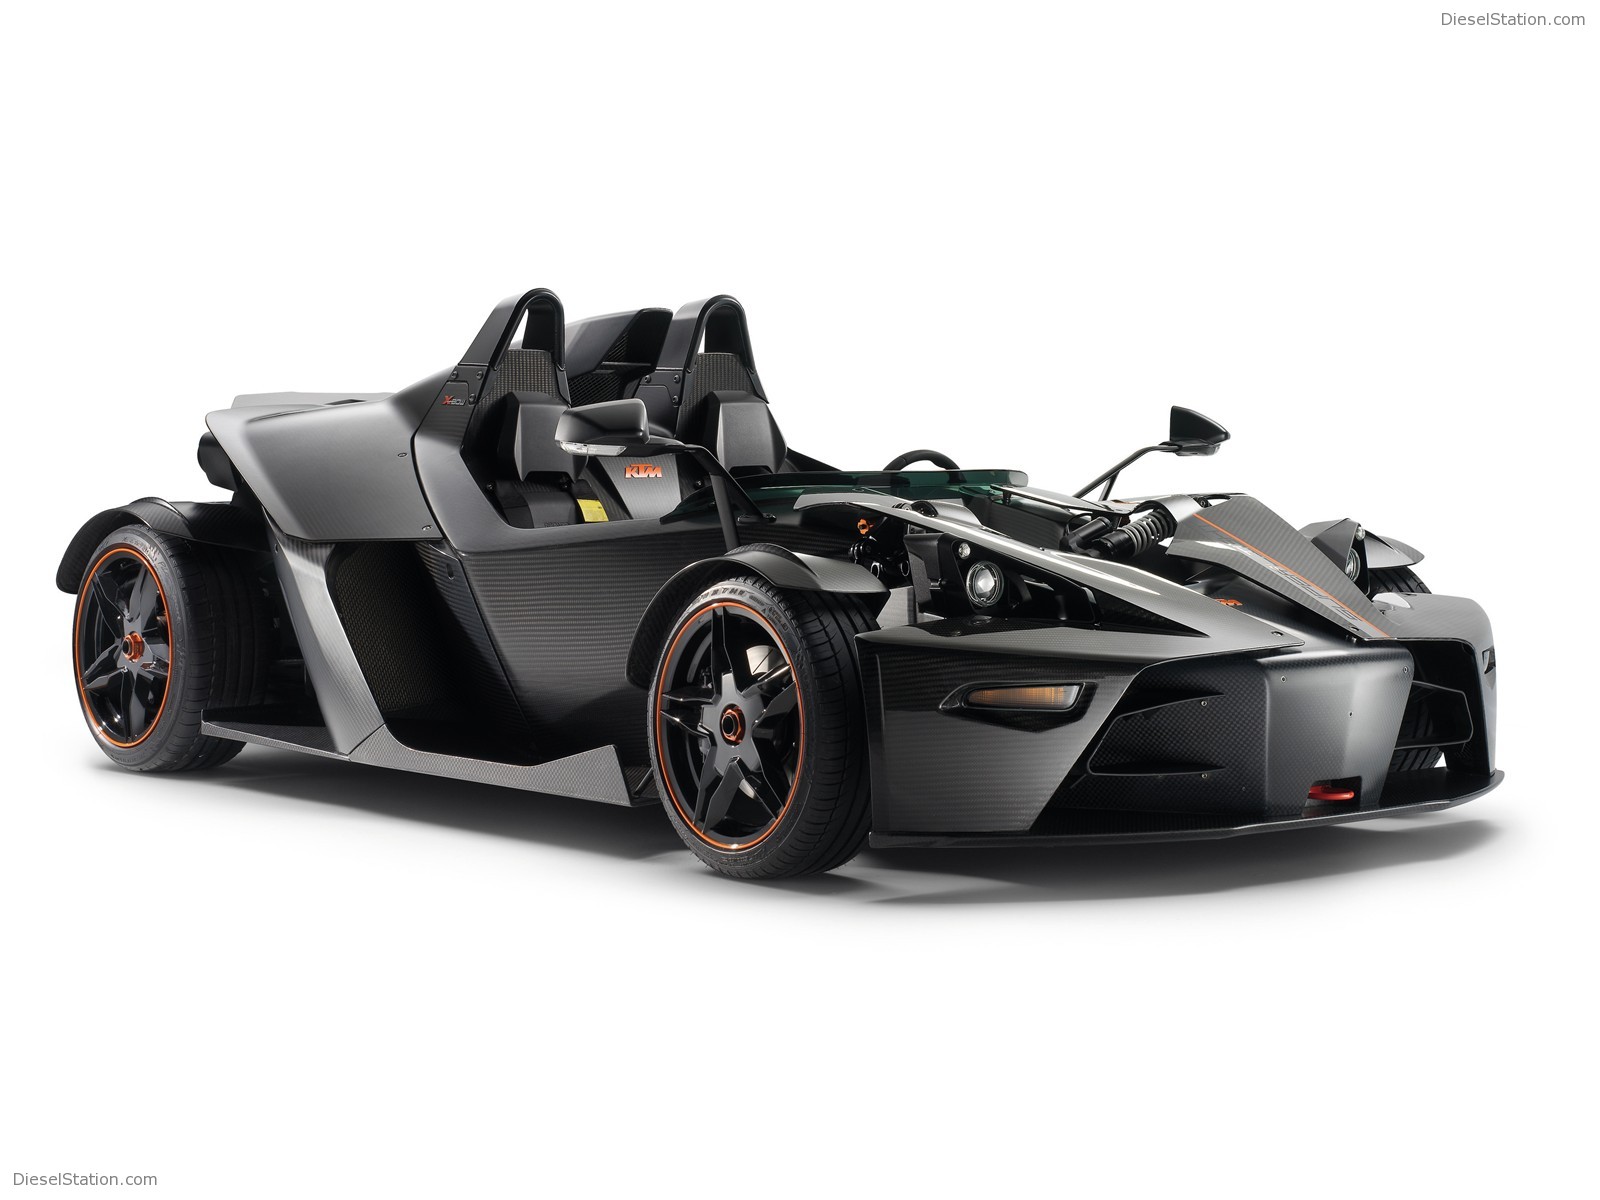 Exciting Cars: KTM X-Bow